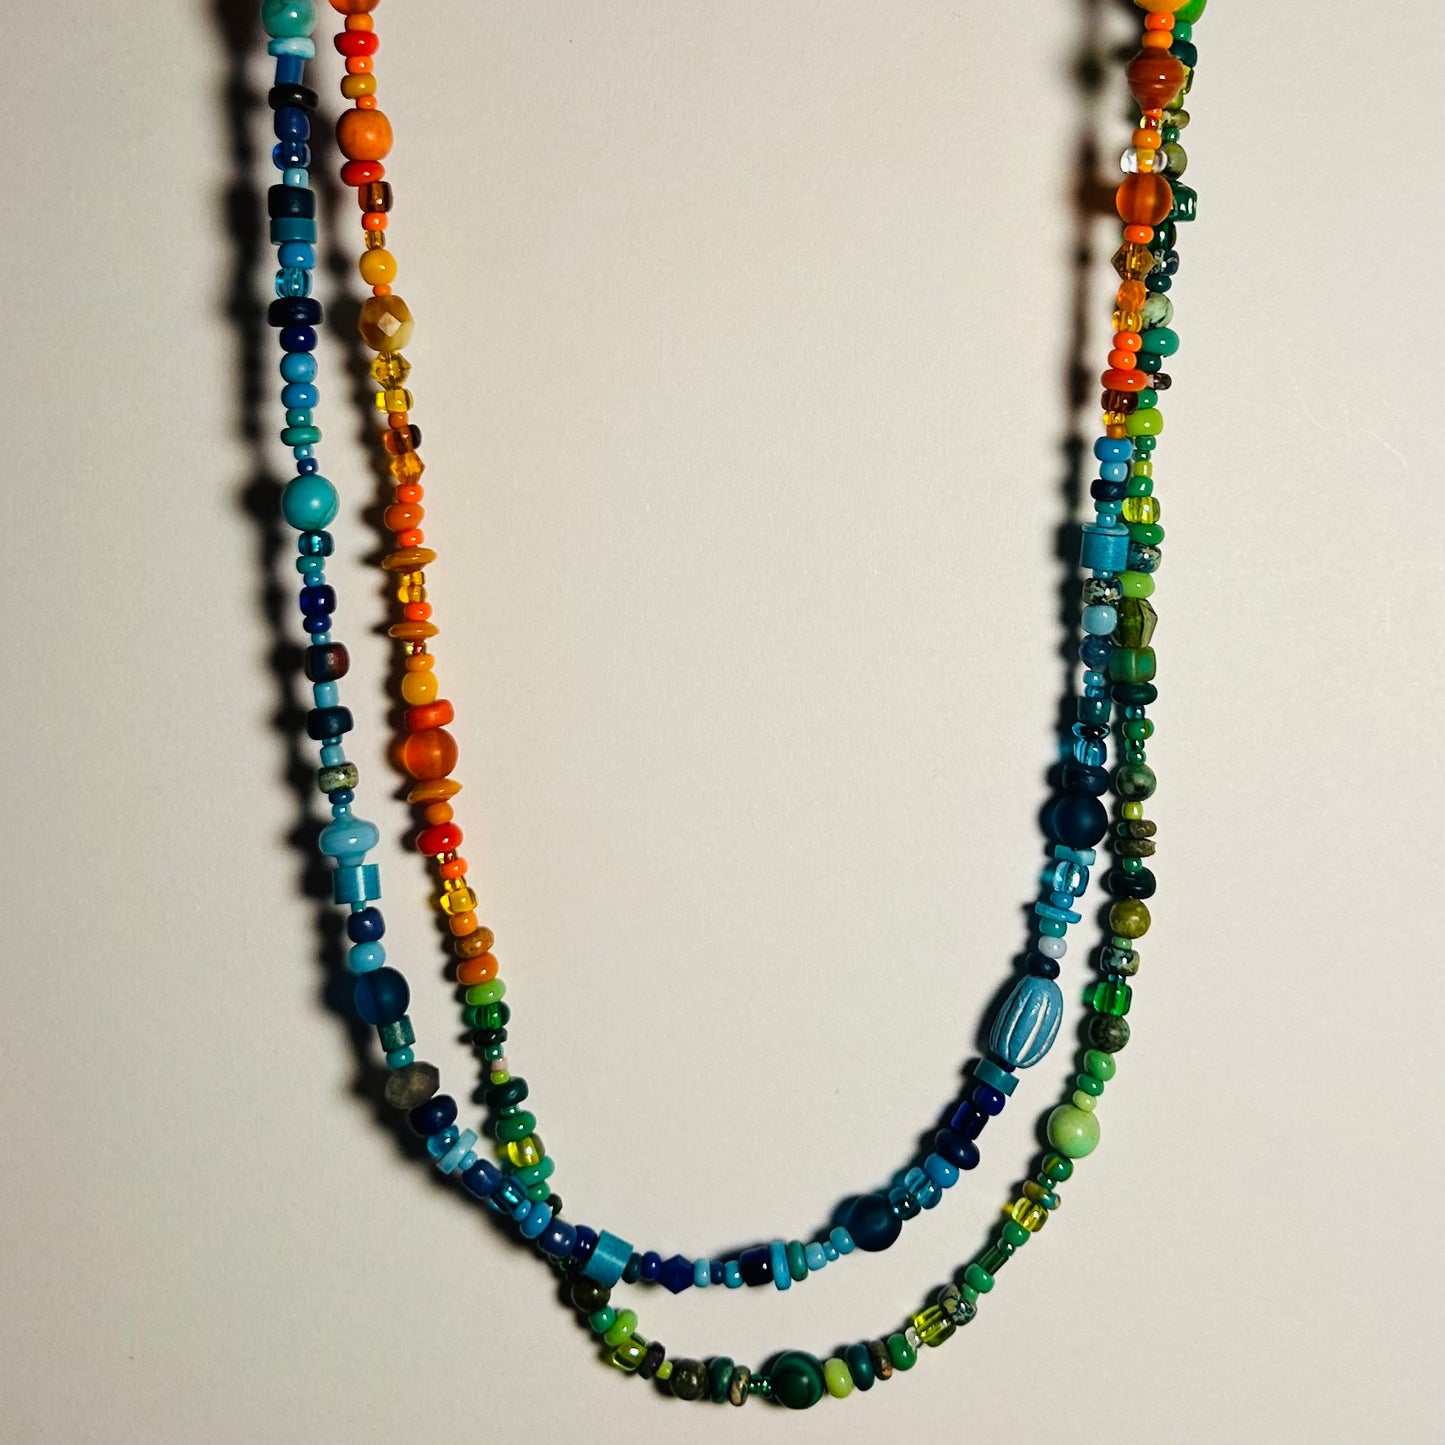 A long necklace displayed hanging, doubled. The necklace has 3 sections of various beads- orange, blue, & green. Handmade beaded necklace, 37.5 inches in length with hook clasp. Made with a marvelous assortment of vintage & new beads from across the globe. Can be worn as a necklace, wrap choker, wrap bracelet, body chain, decorative belt.

